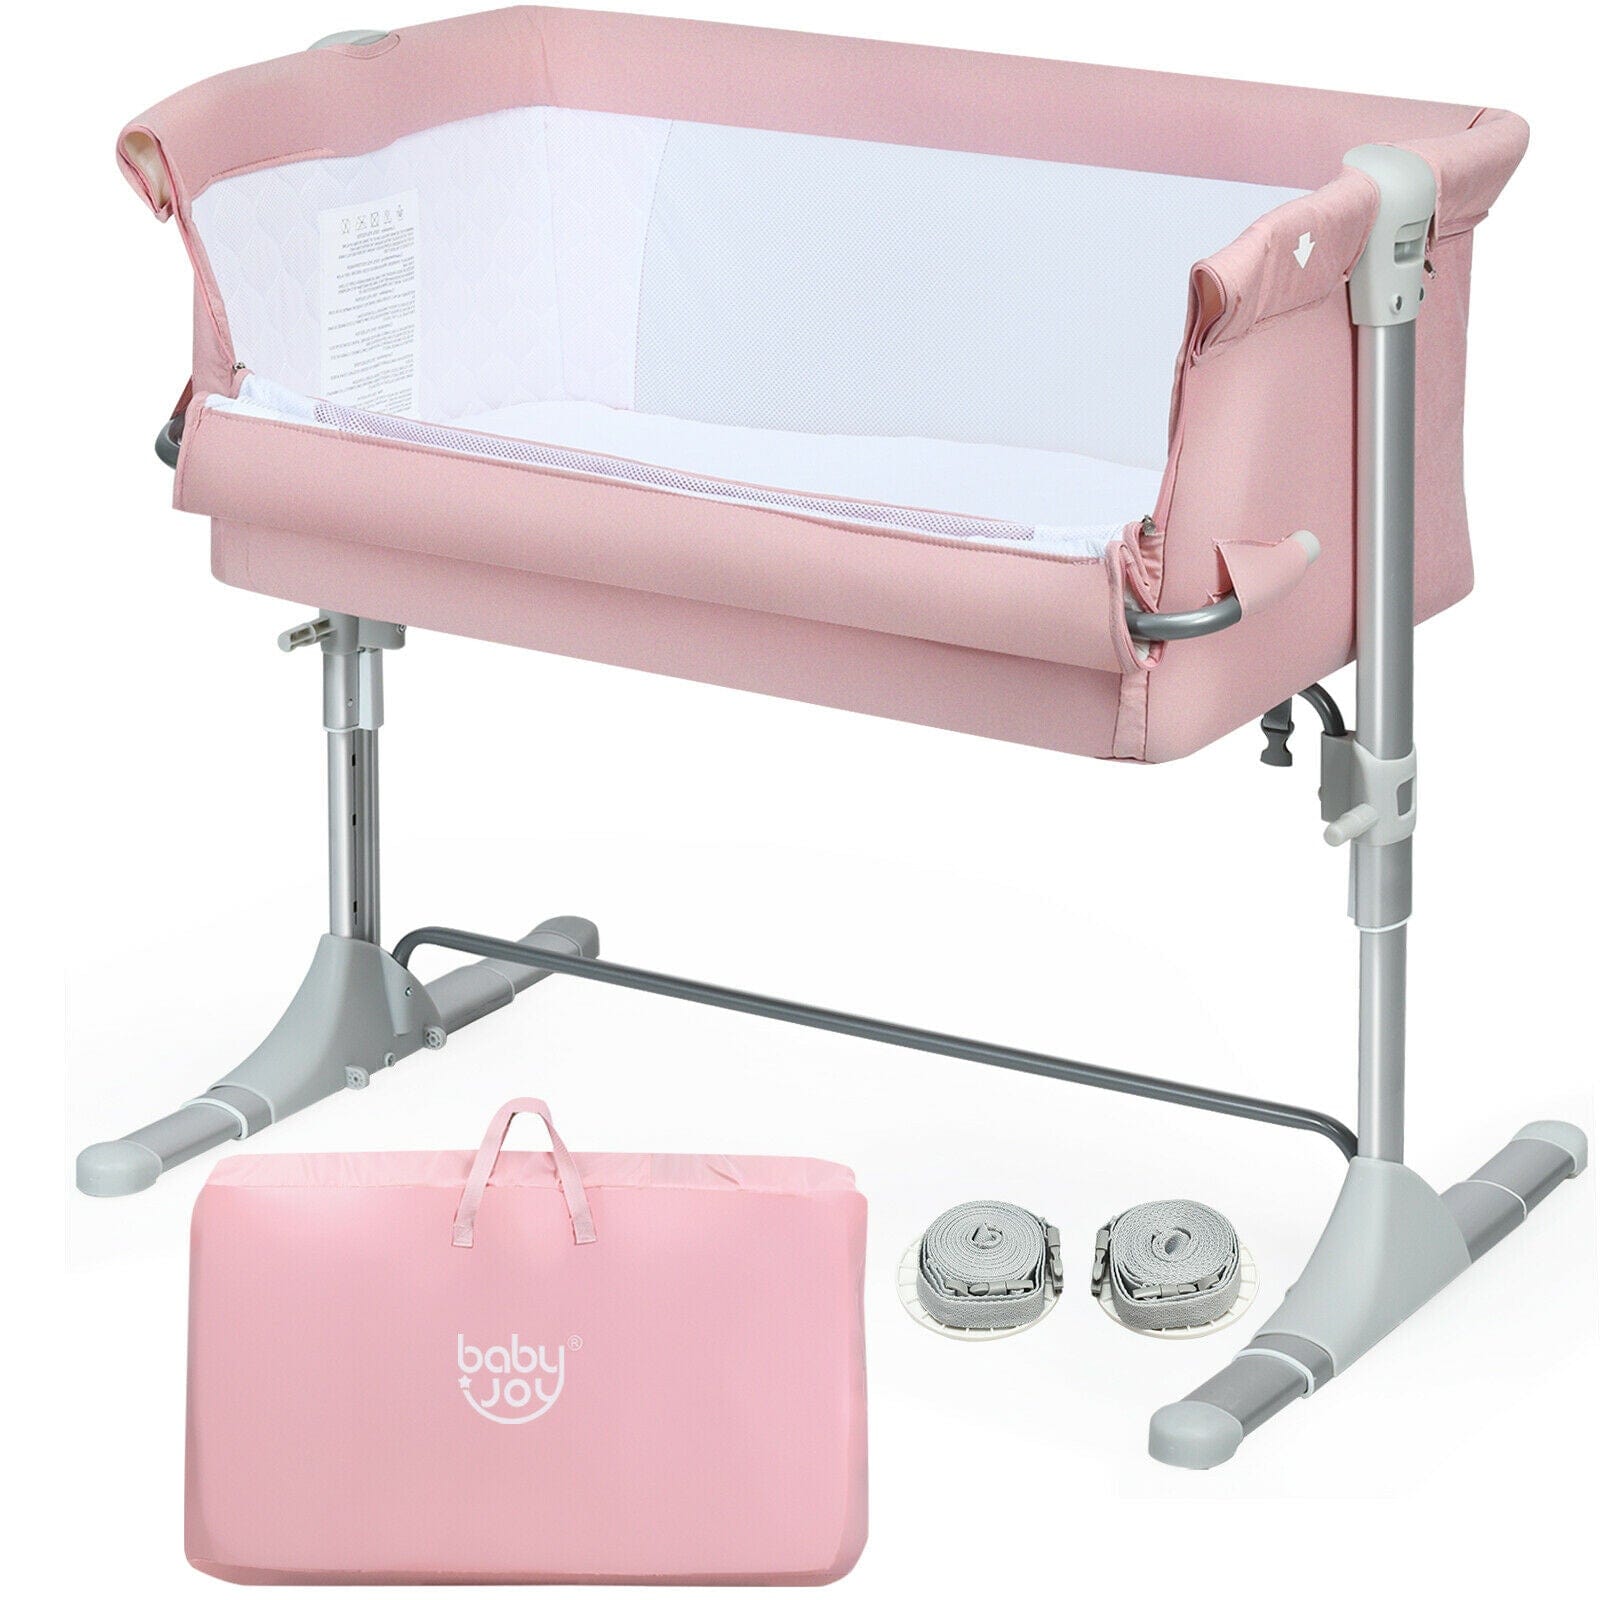 Proactive Baby Babyjoy Baby Bedside Crib I Portable Bed Side Bassinet with Carrying Bag